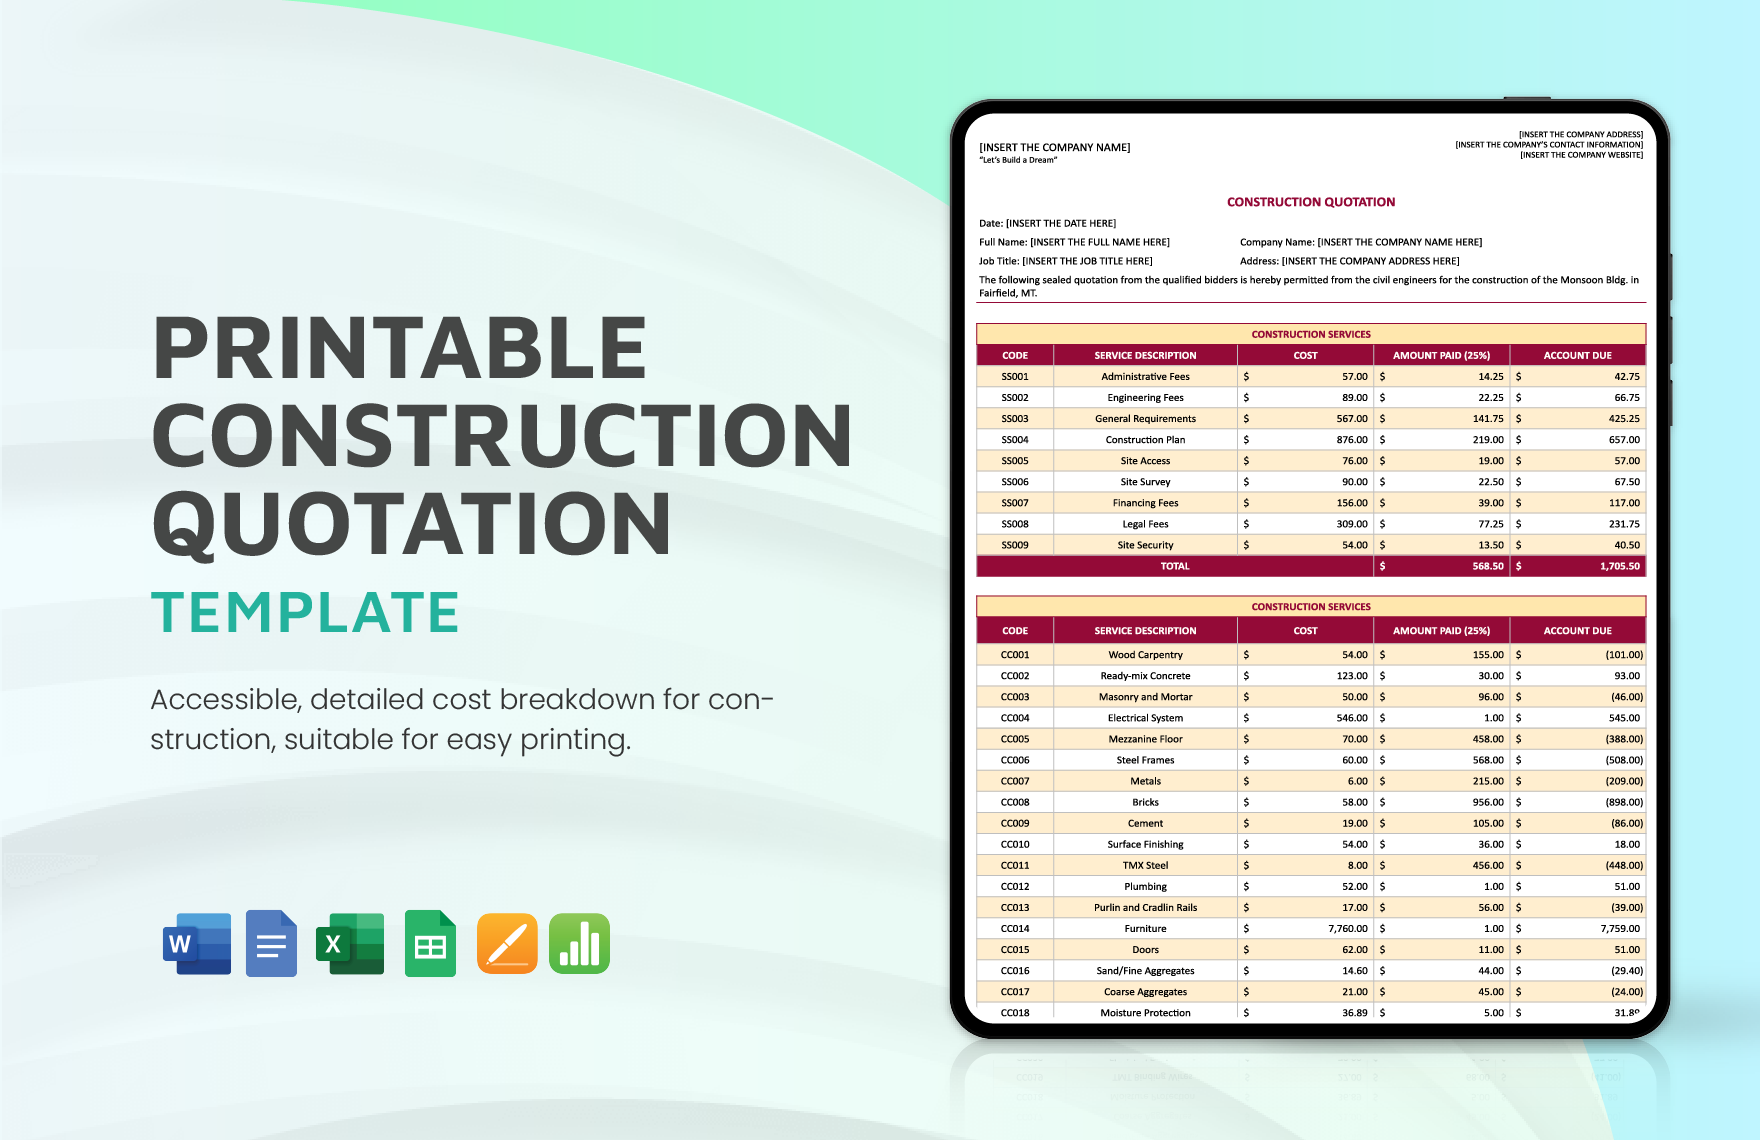 Printable Construction Quotation Template